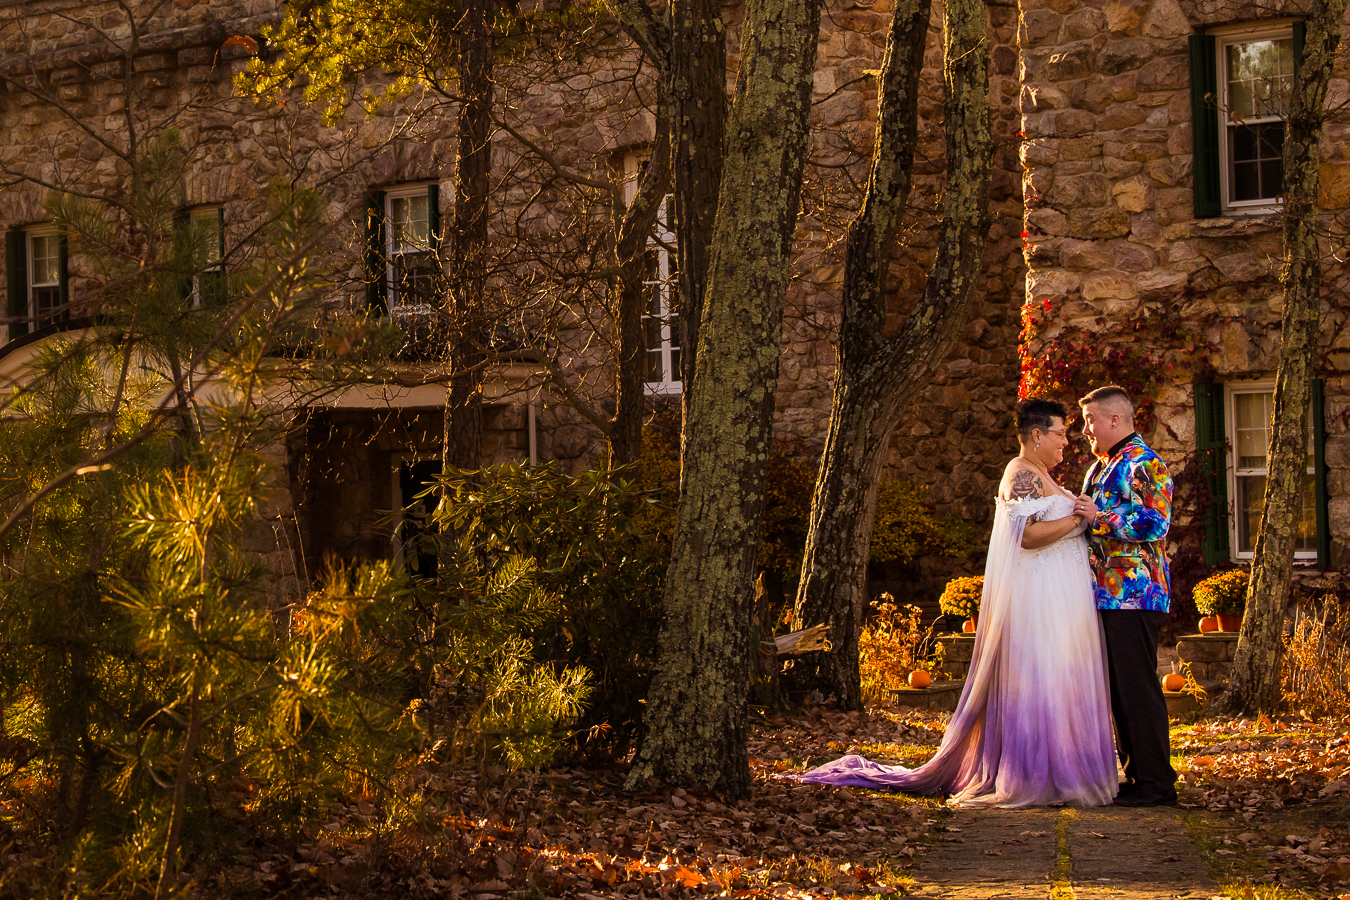 kings gap mansion photographer, lisa rhinehart, captures this image of the couple standing in front of the stone mansion in their vibrant, colorful wedding attire during their after session 